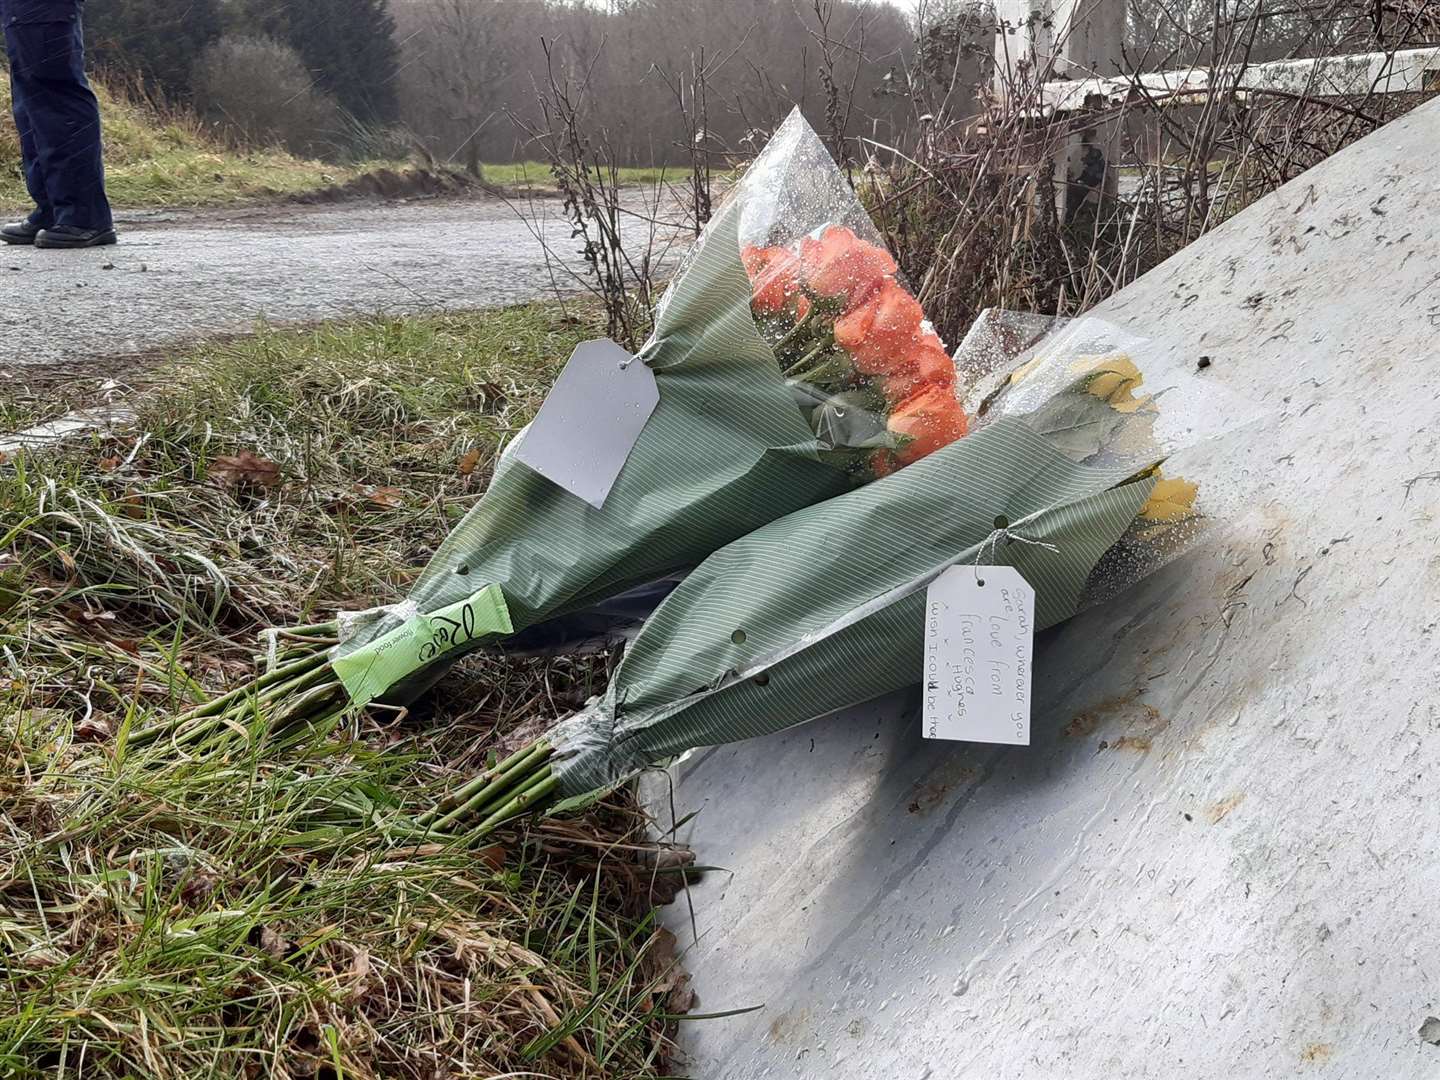 Flowers laid at the site where human remains were found in the search for Sarah Everard